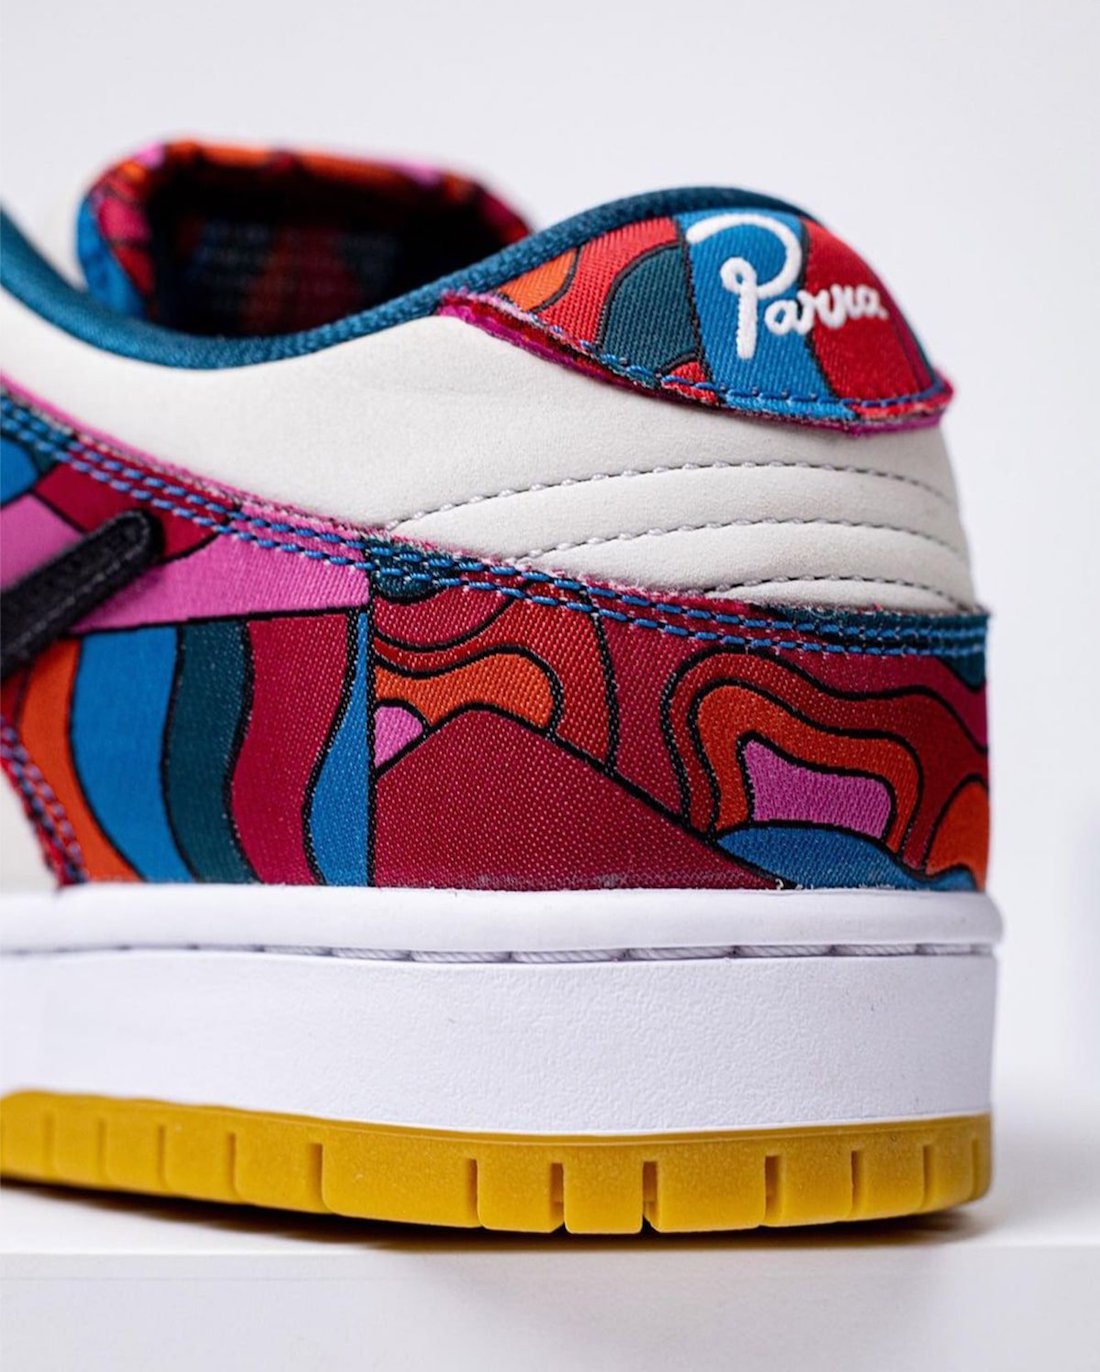 Parra Nike SB Dunk Low DH7695 600 Release Date 10